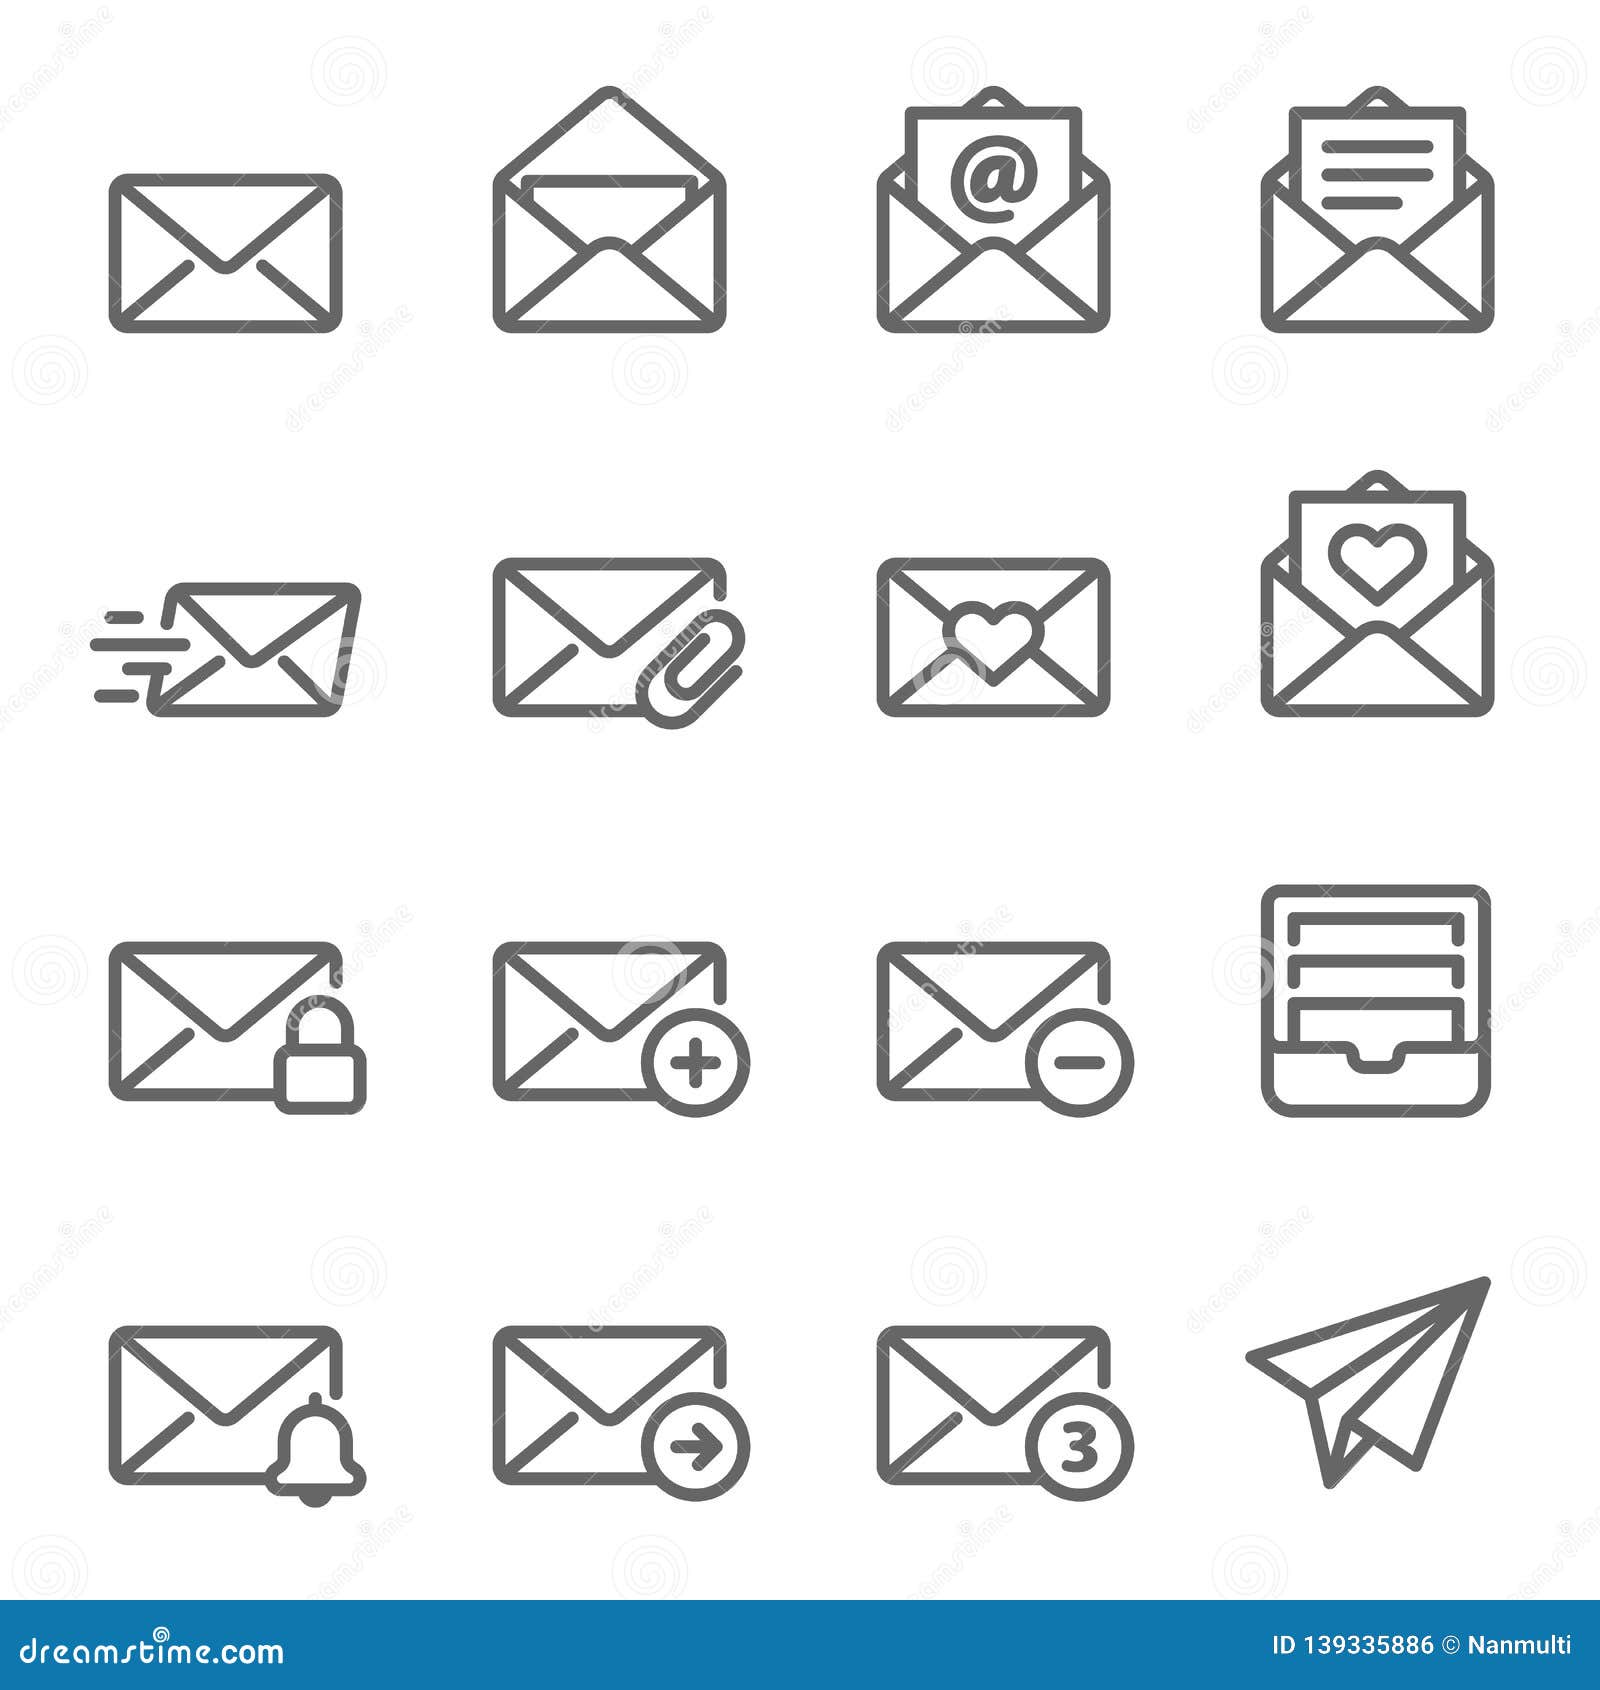 email  line icon set. contains such icons as inbox, letter, attachment, envelope and more. expanded stroke